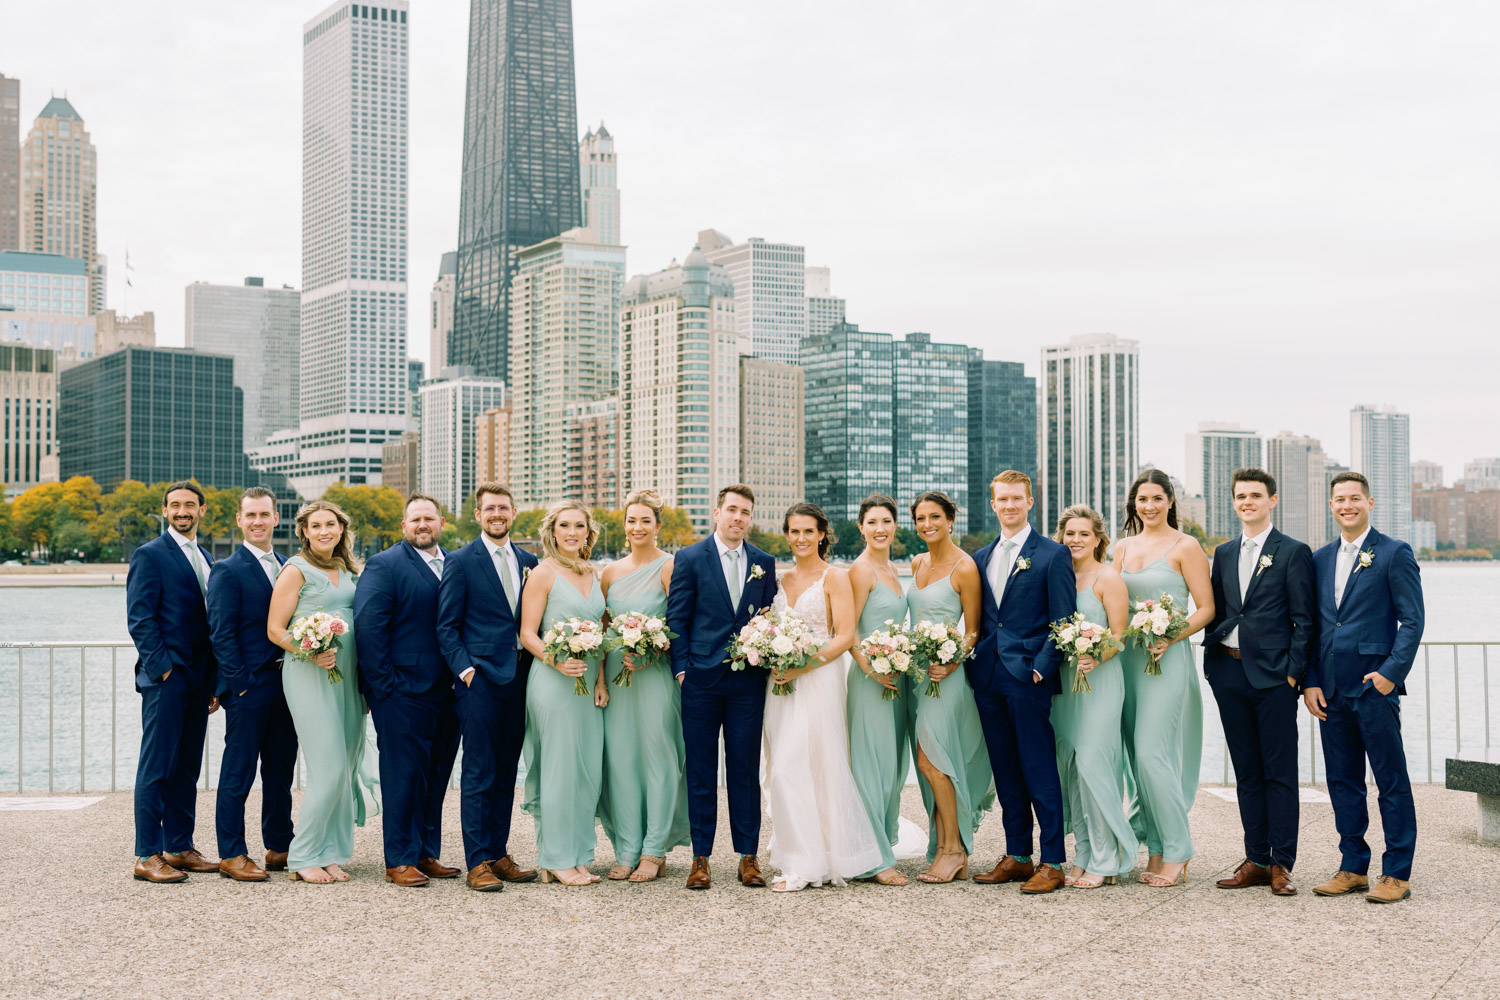 Wedding party portraits at Olive Park in Chicago